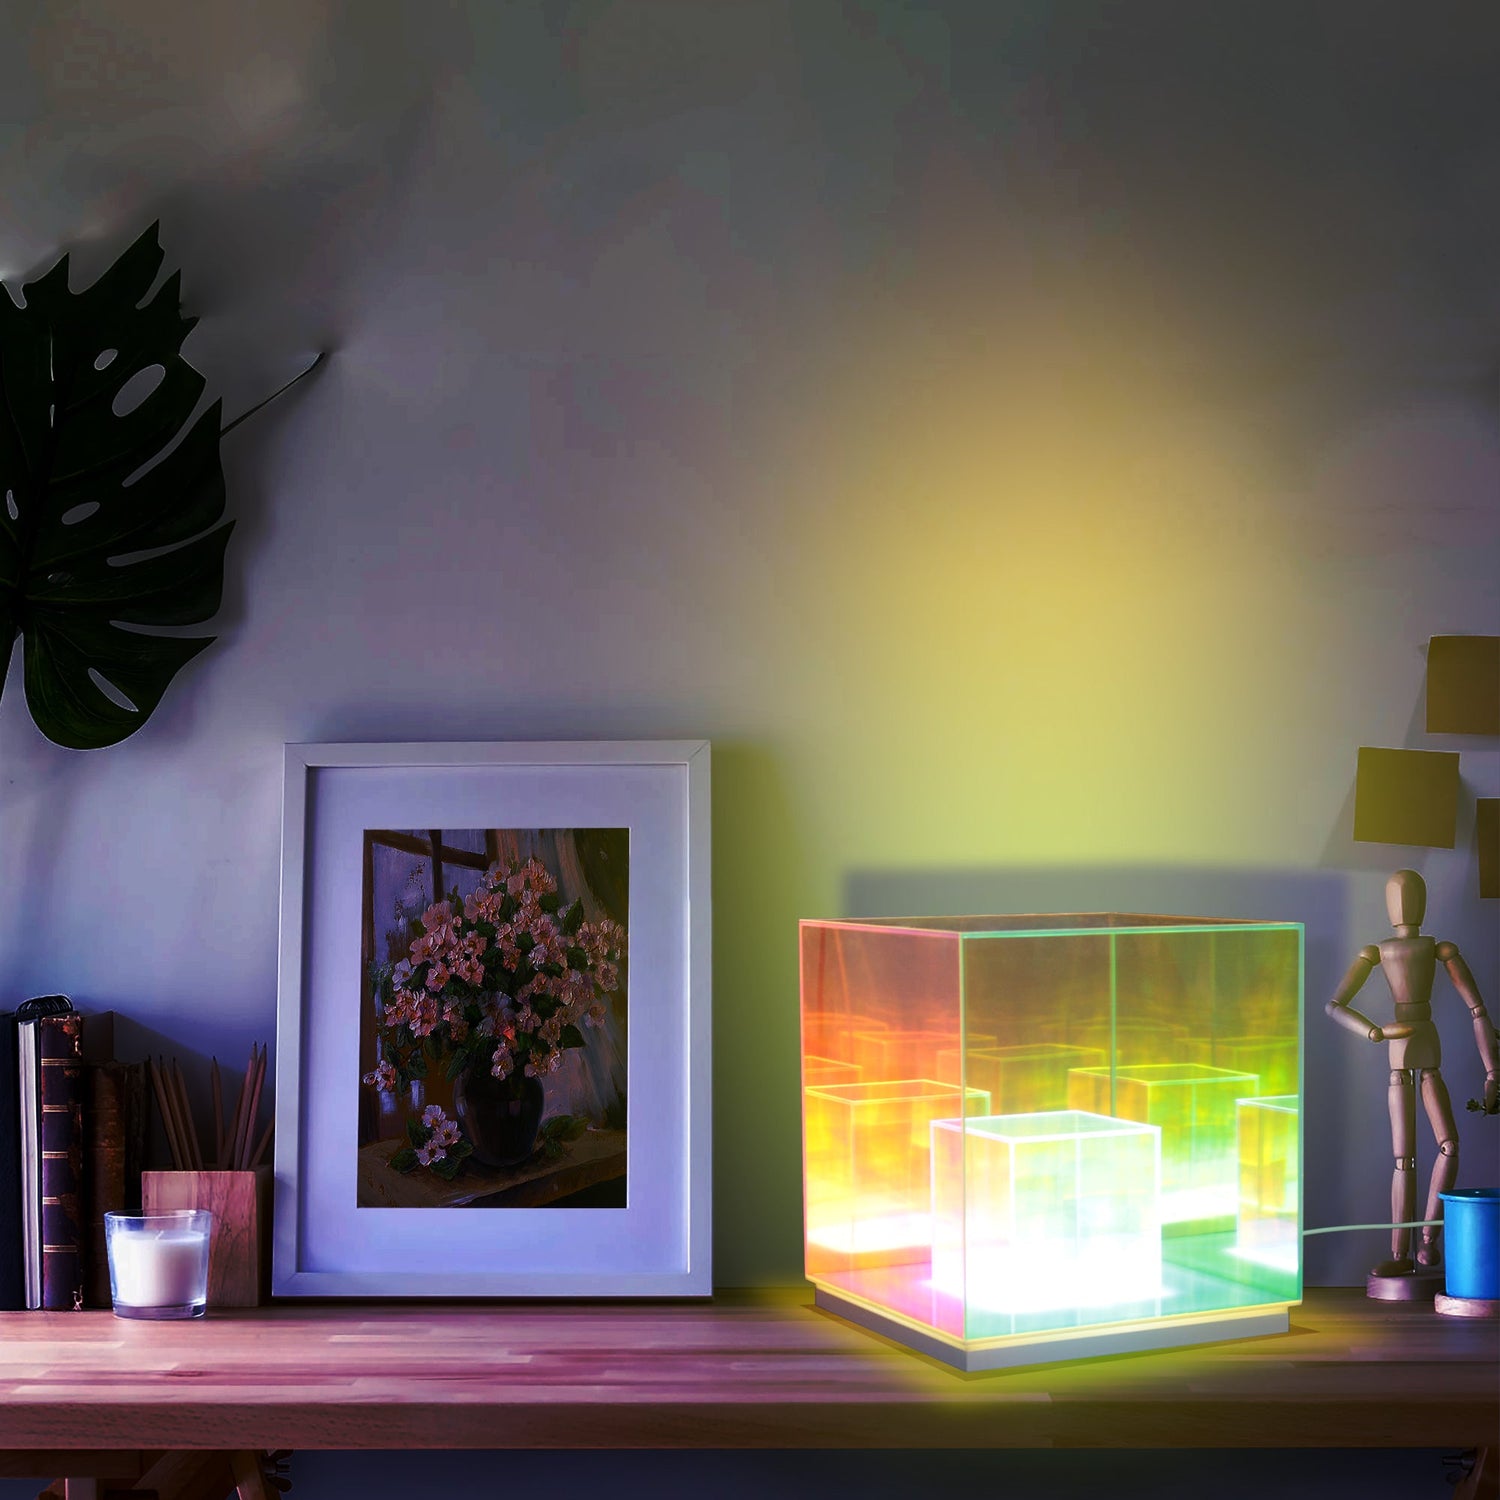 Cube Bedside Lamp - Bed Lamp